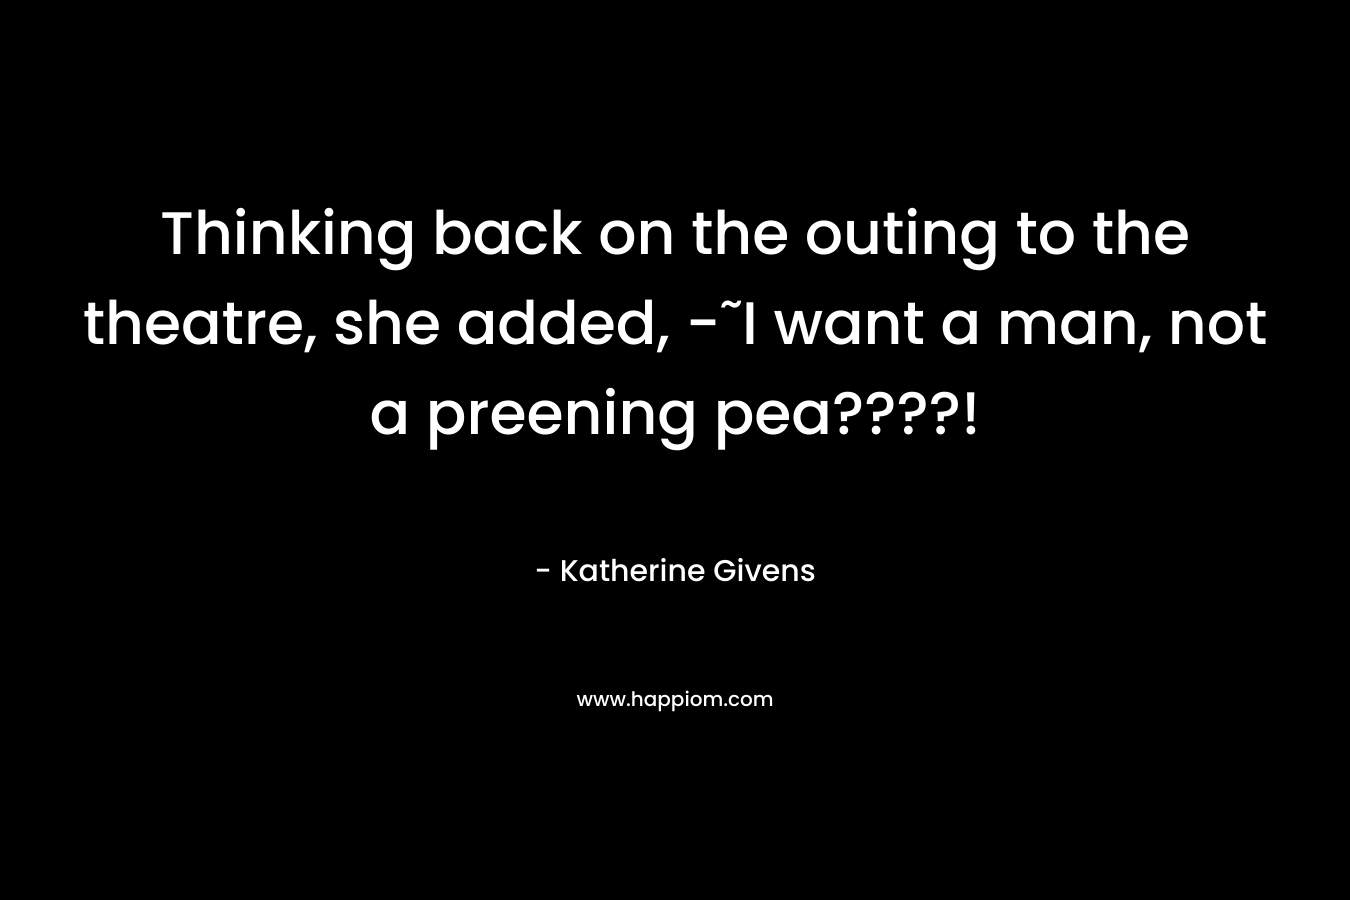 Thinking back on the outing to the theatre, she added, -˜I want a man, not a preening pea????! – Katherine Givens